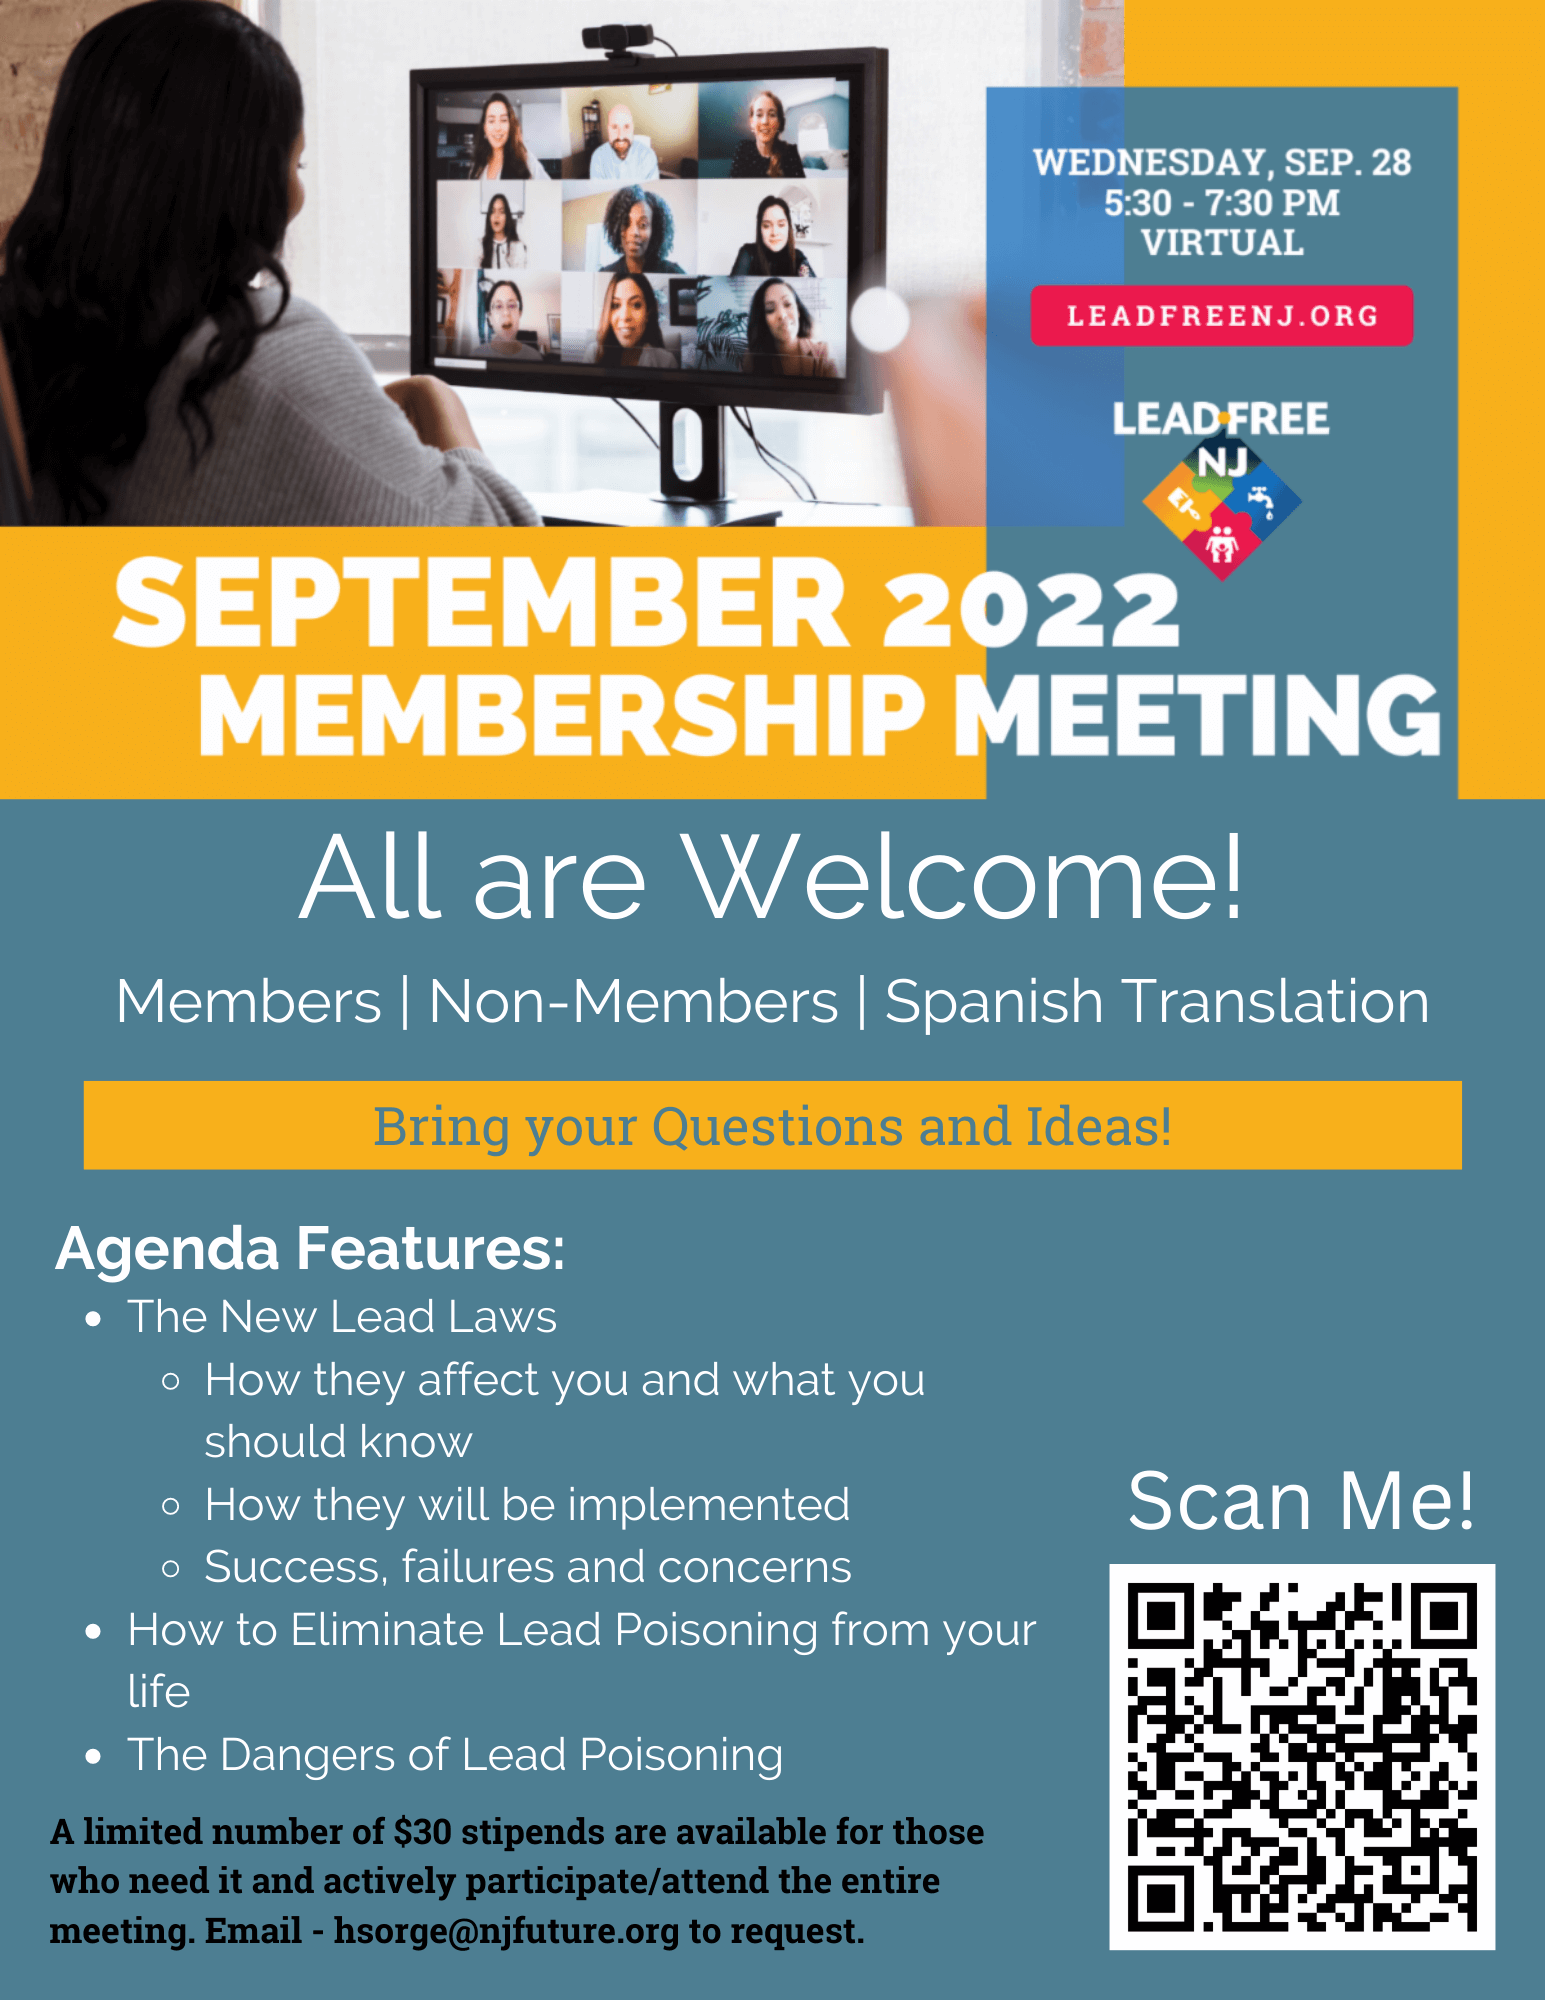 A flyer inviting people to the September Lead-Free NJ Membership Meeting in English